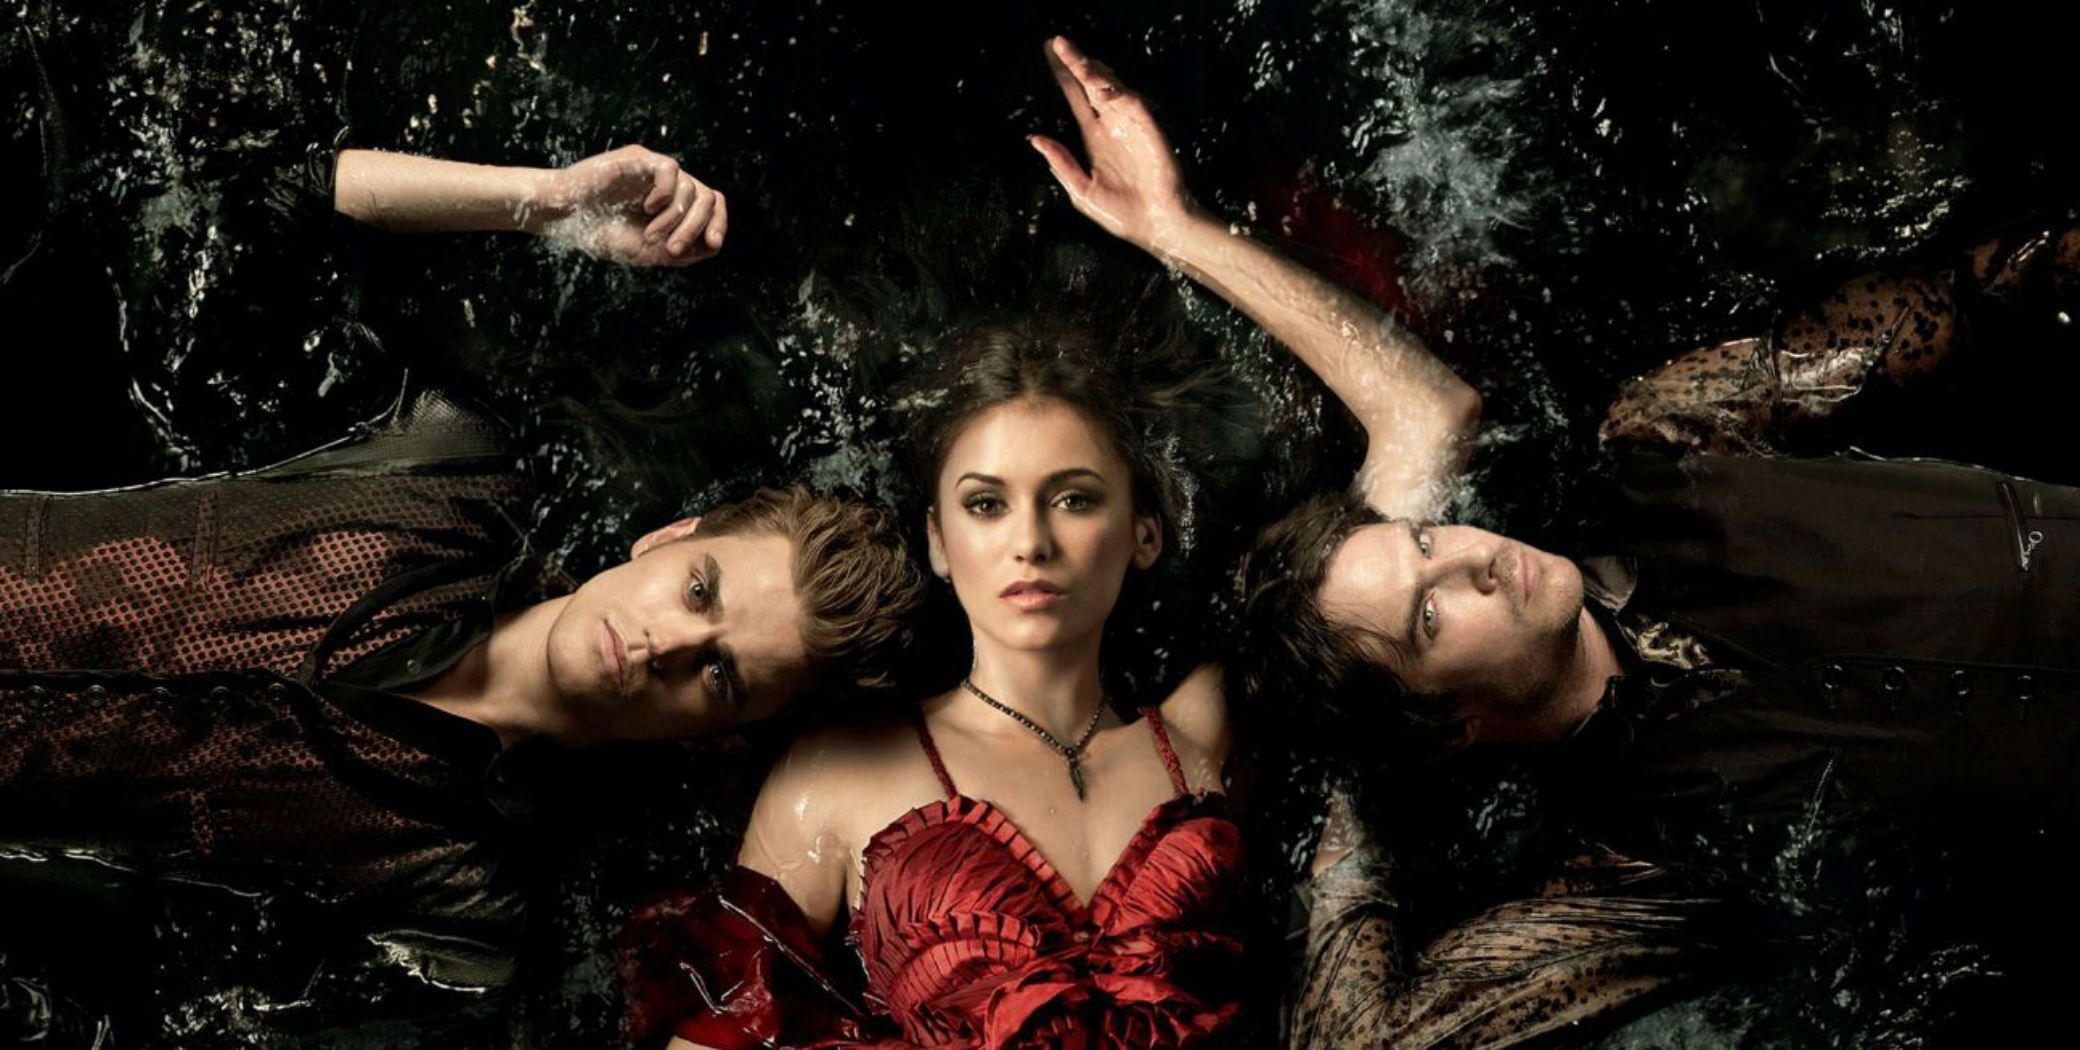 Themain characters in a promo image for The Vampire Diaries.